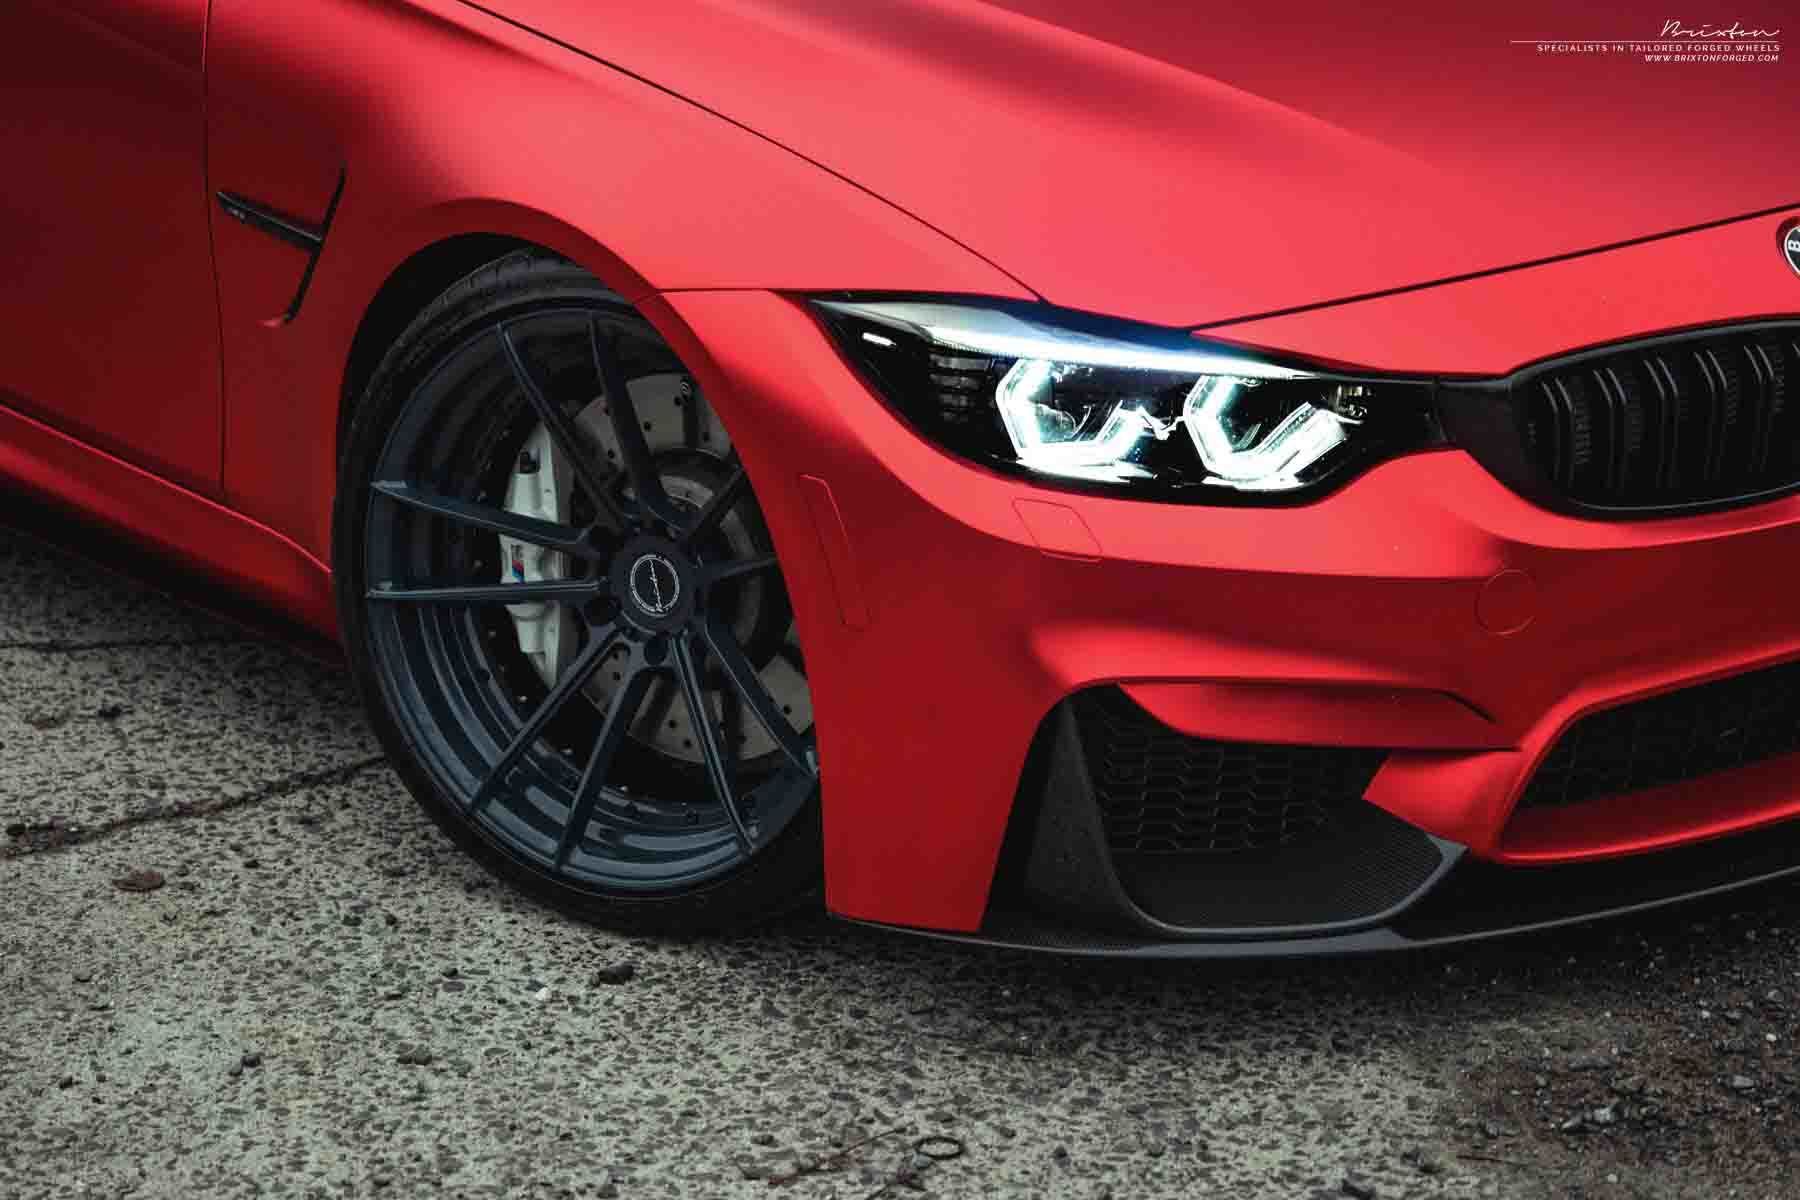 images-products-1-2167-232974455-brixton-forged-wheels-matte-red-frozen-red-bmw-f80-m3-brixton-forged-m51-duo-series-forged-wheel.jpg